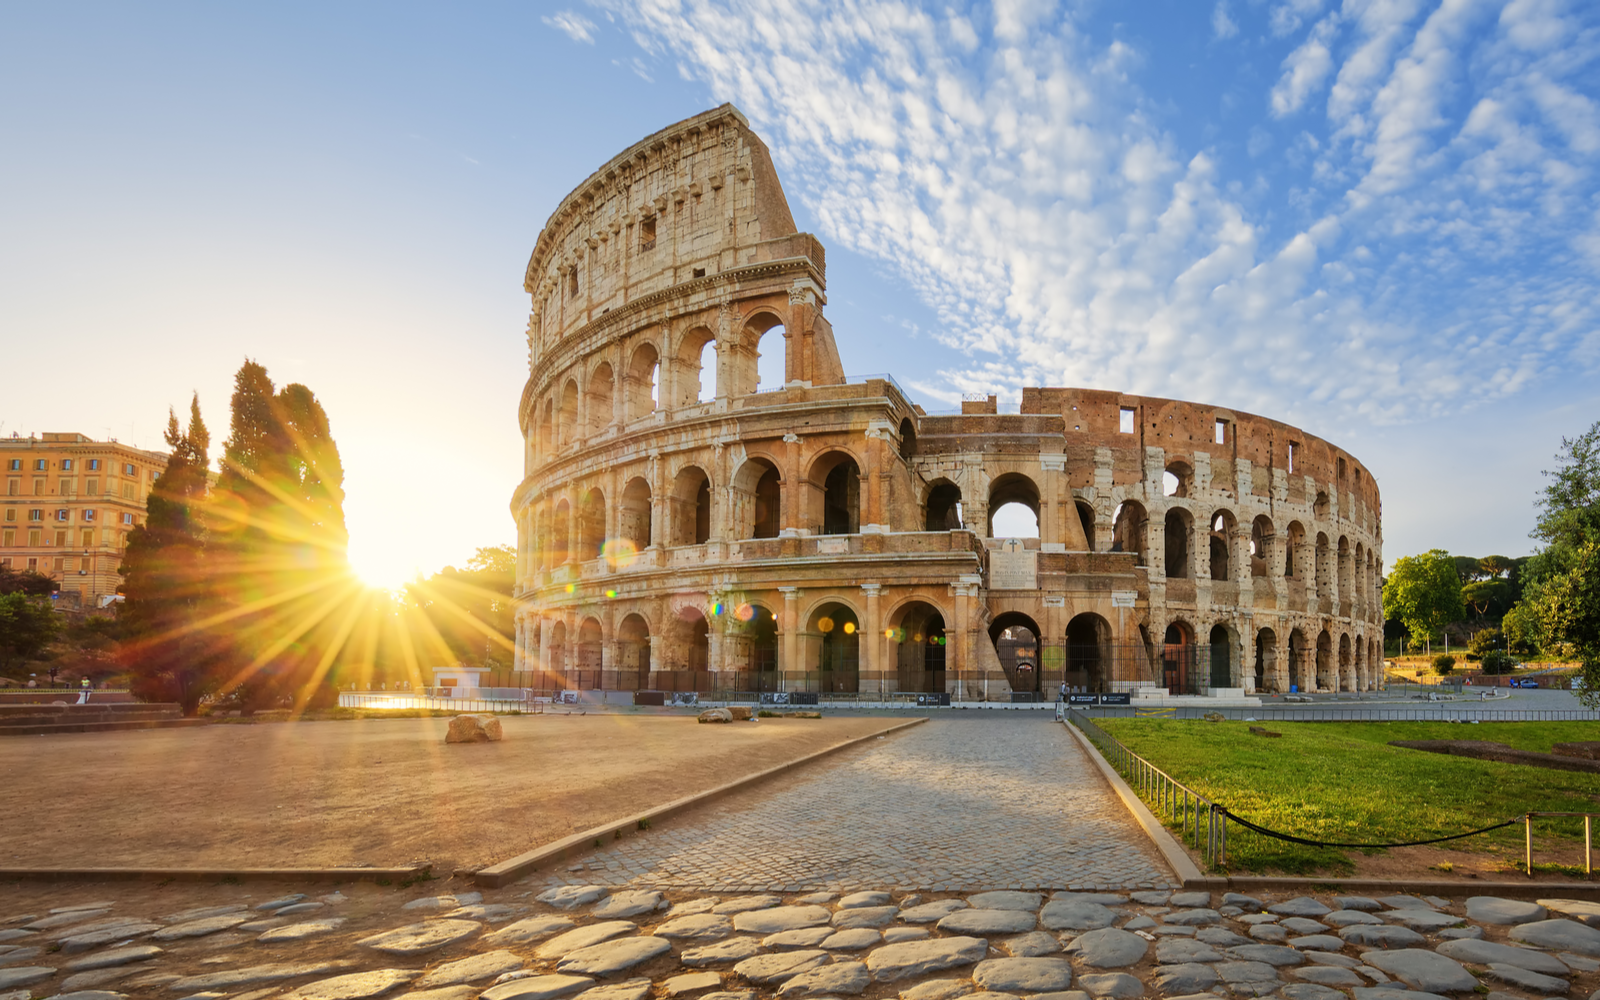 Gorgeous view of the Colosseum in Rome, one of the best places to visit in Italy, as viewed in the morning sun